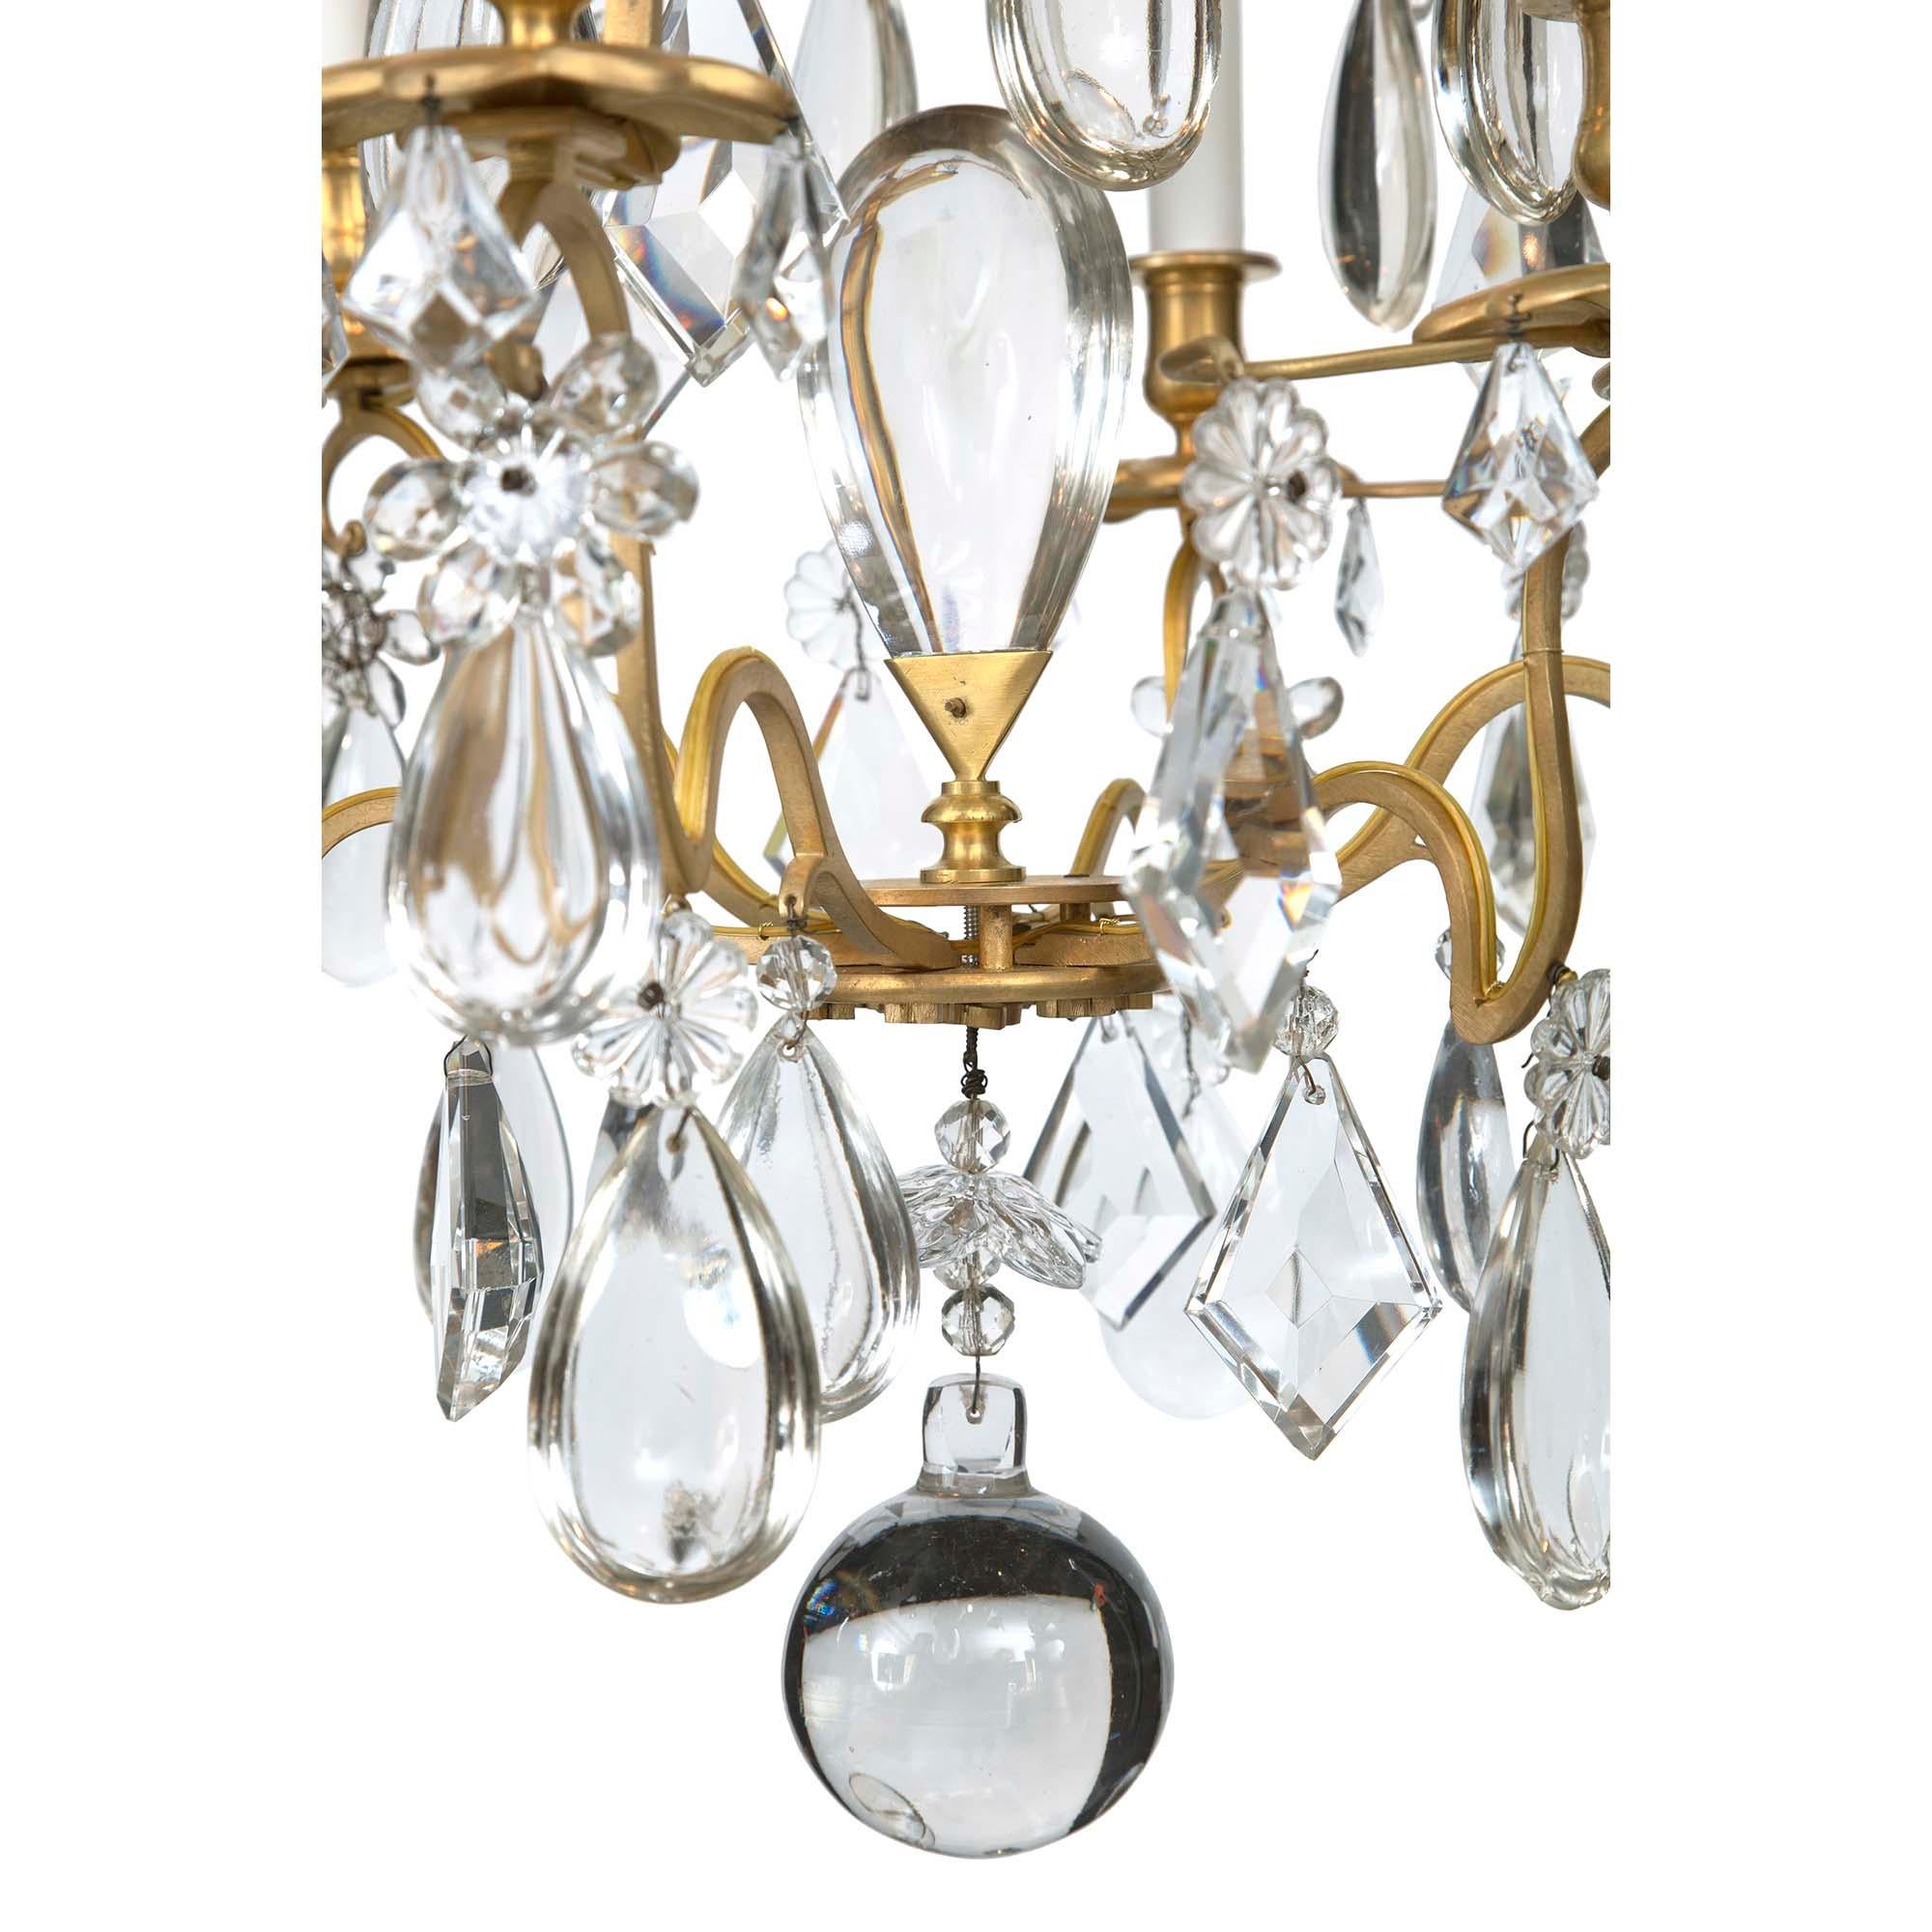 19th Century French Louis XV Style Baccarat Crystal and Ormolu Six-Light Chandelier For Sale